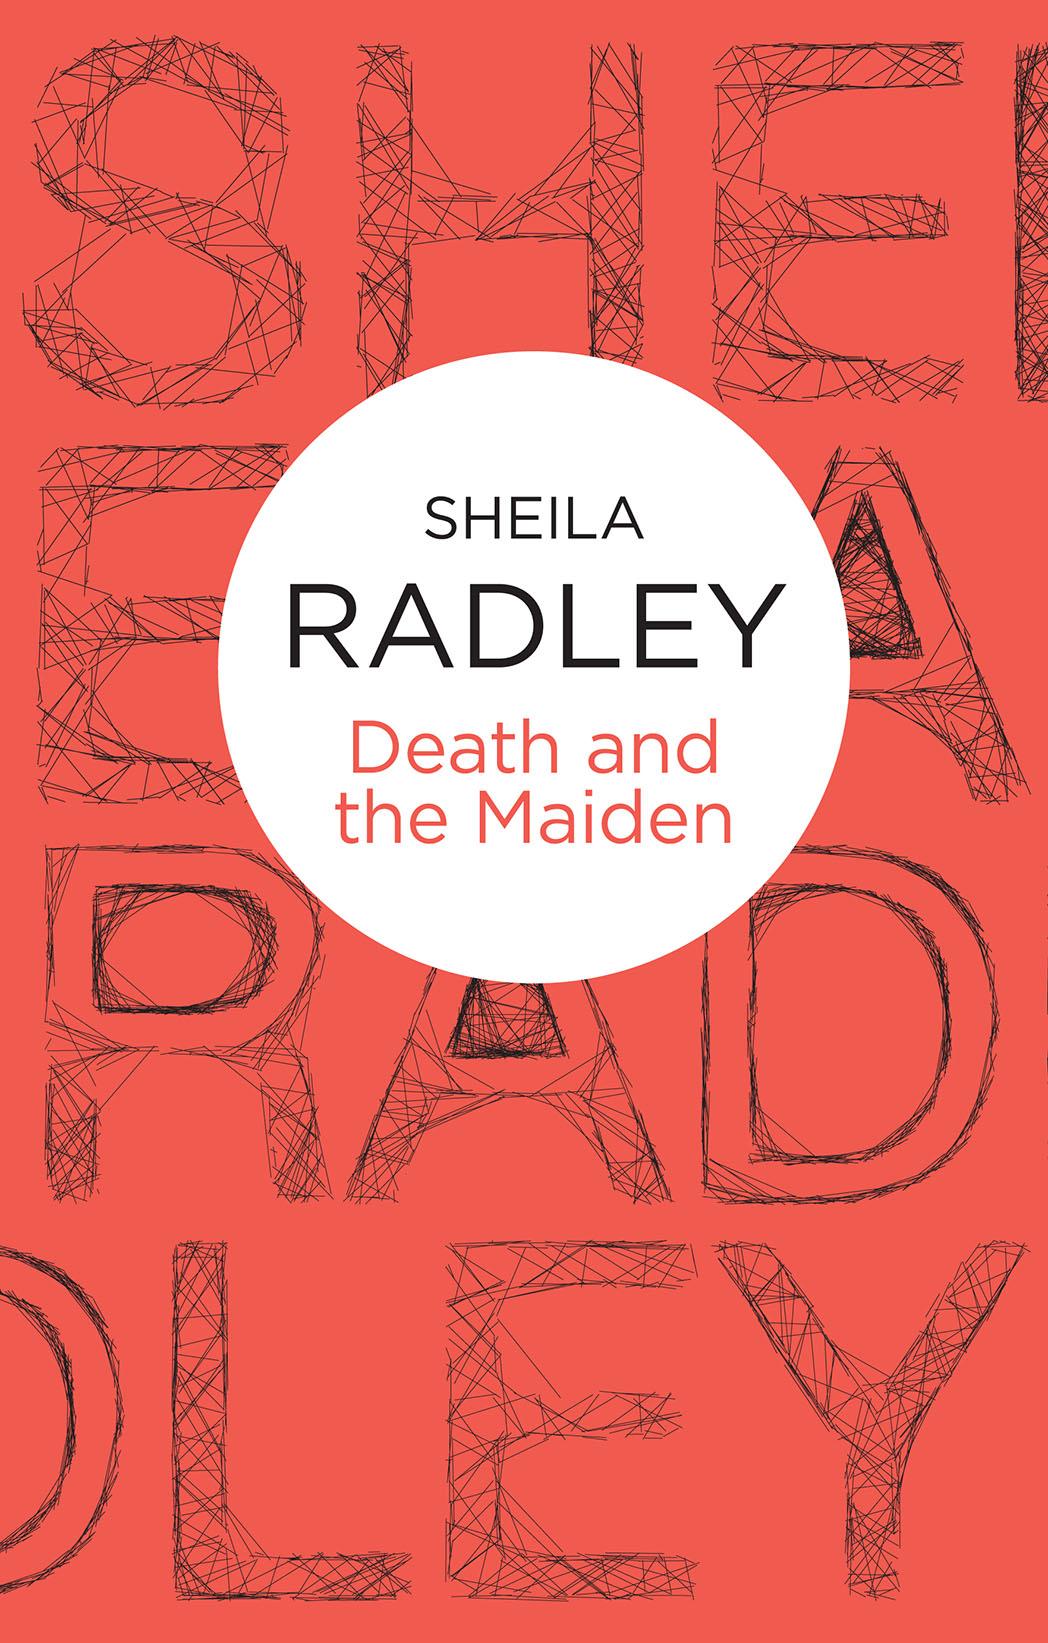 Death and the Maiden by Sheila Radley